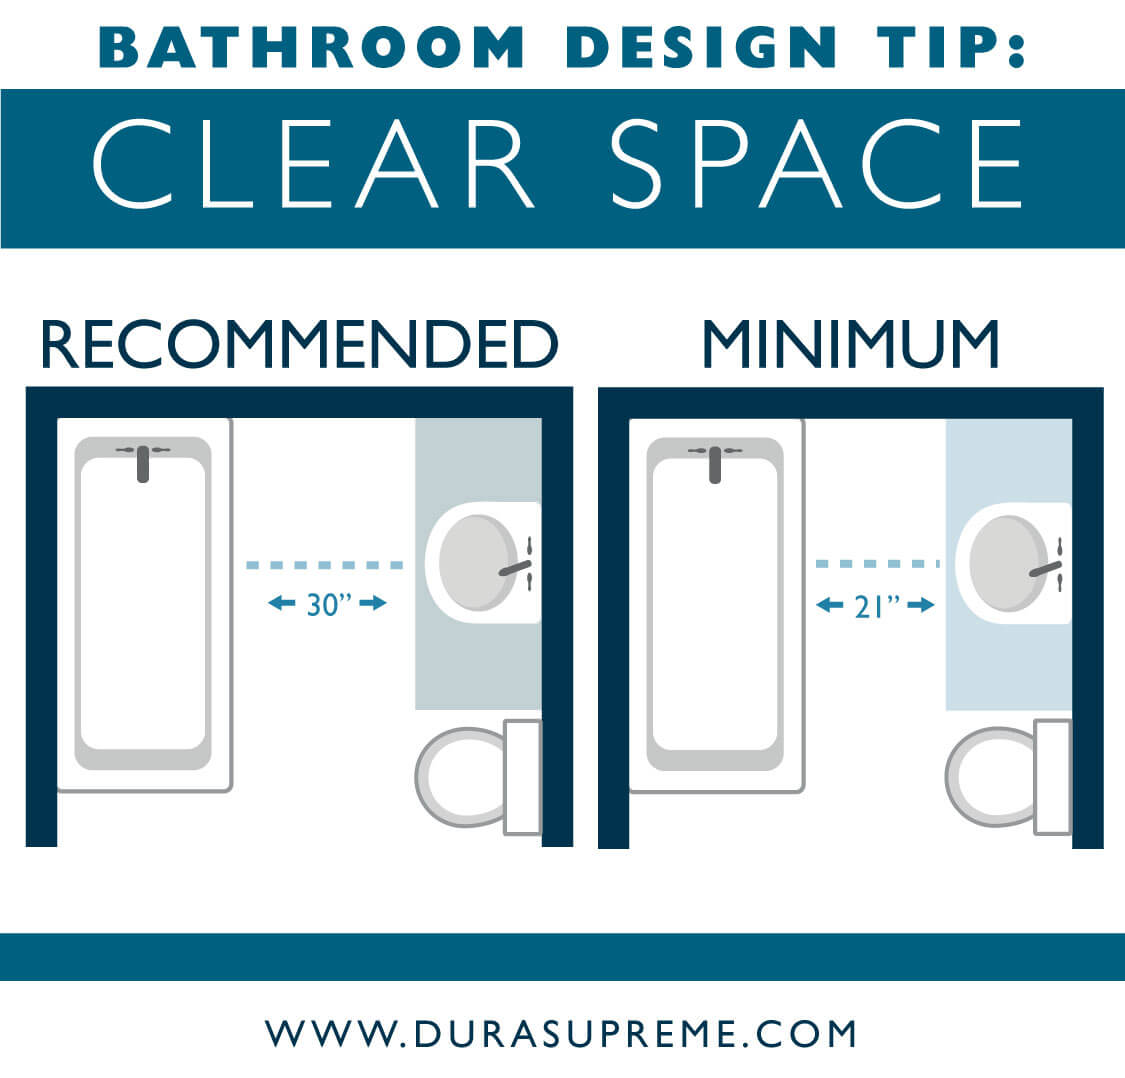 Bathroom design tip - Recommended and minimum Clear Space floor walk way. Bathroom design guidelines from Dura Supreme Cabinetry.